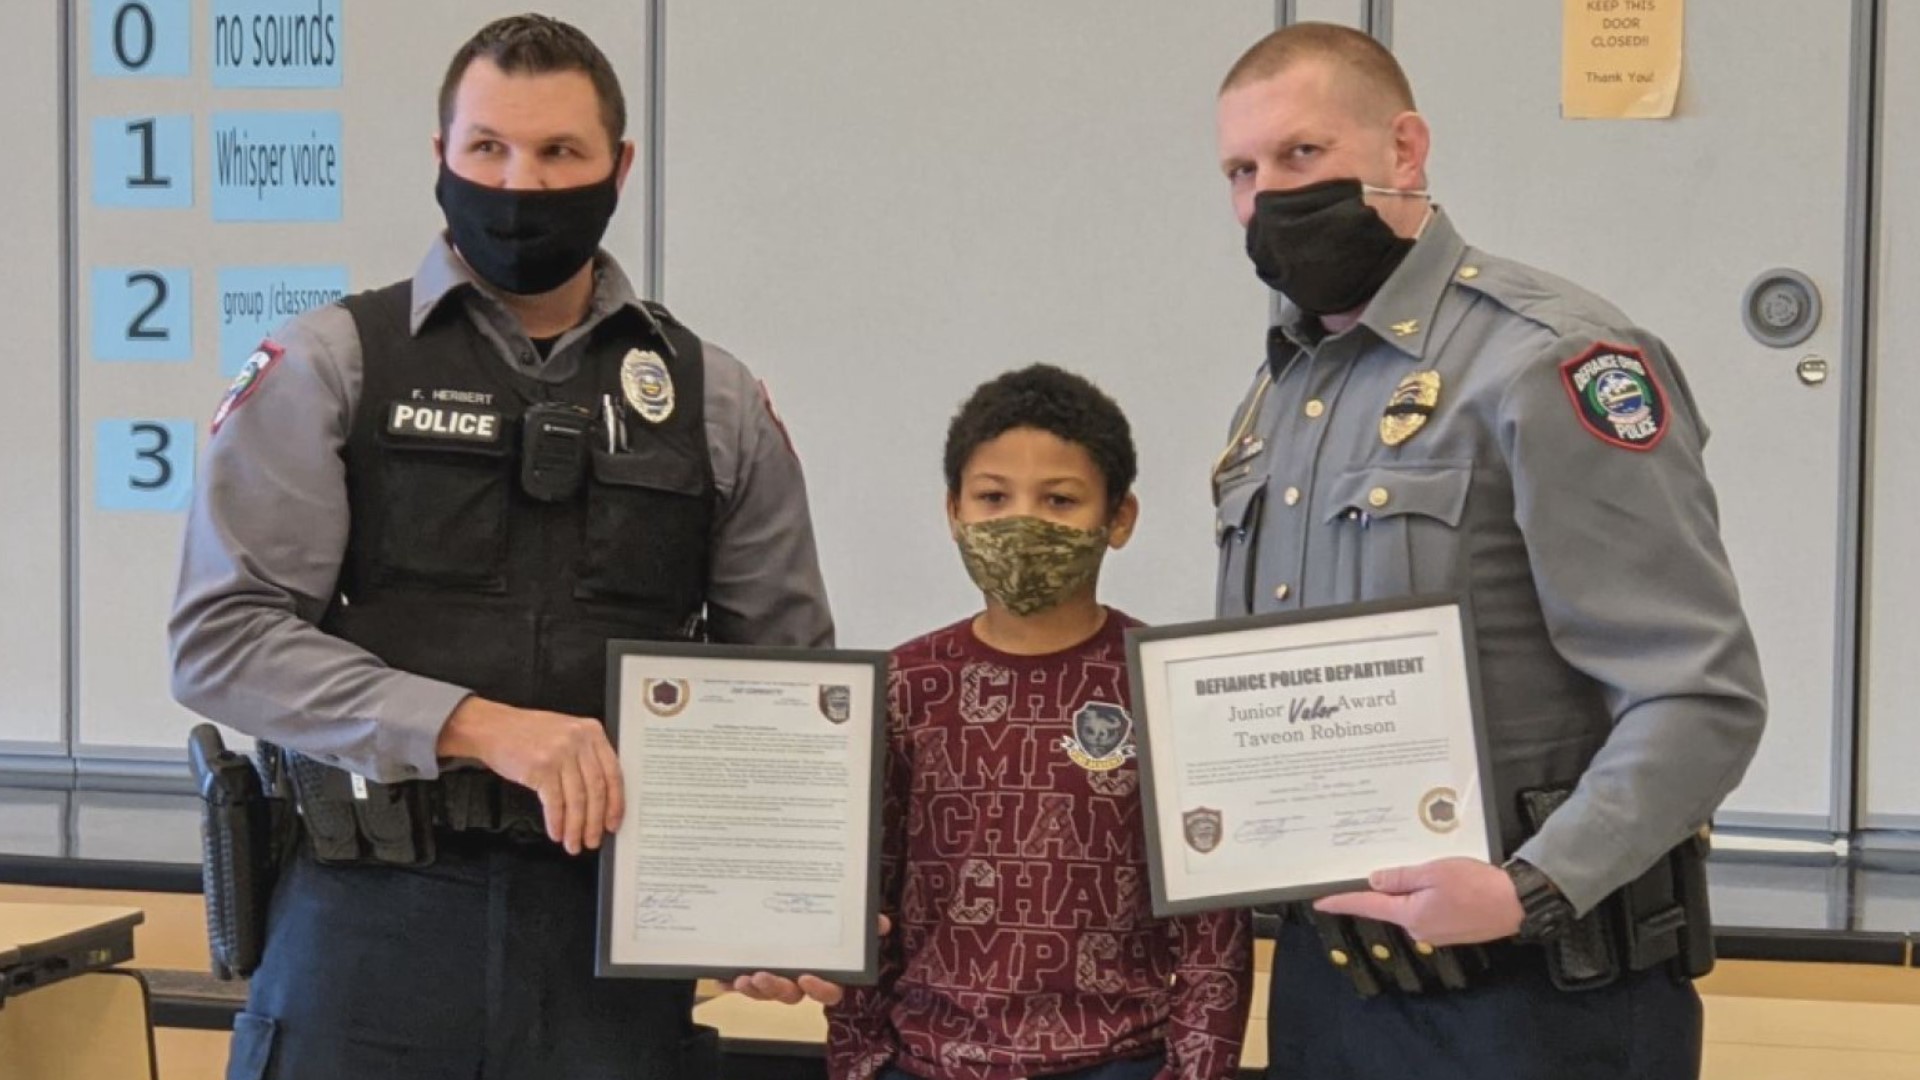 Taveon Robinson was rewarded by Defiance police with a "Junior Valor Award" certificate Wednesday afternoon.